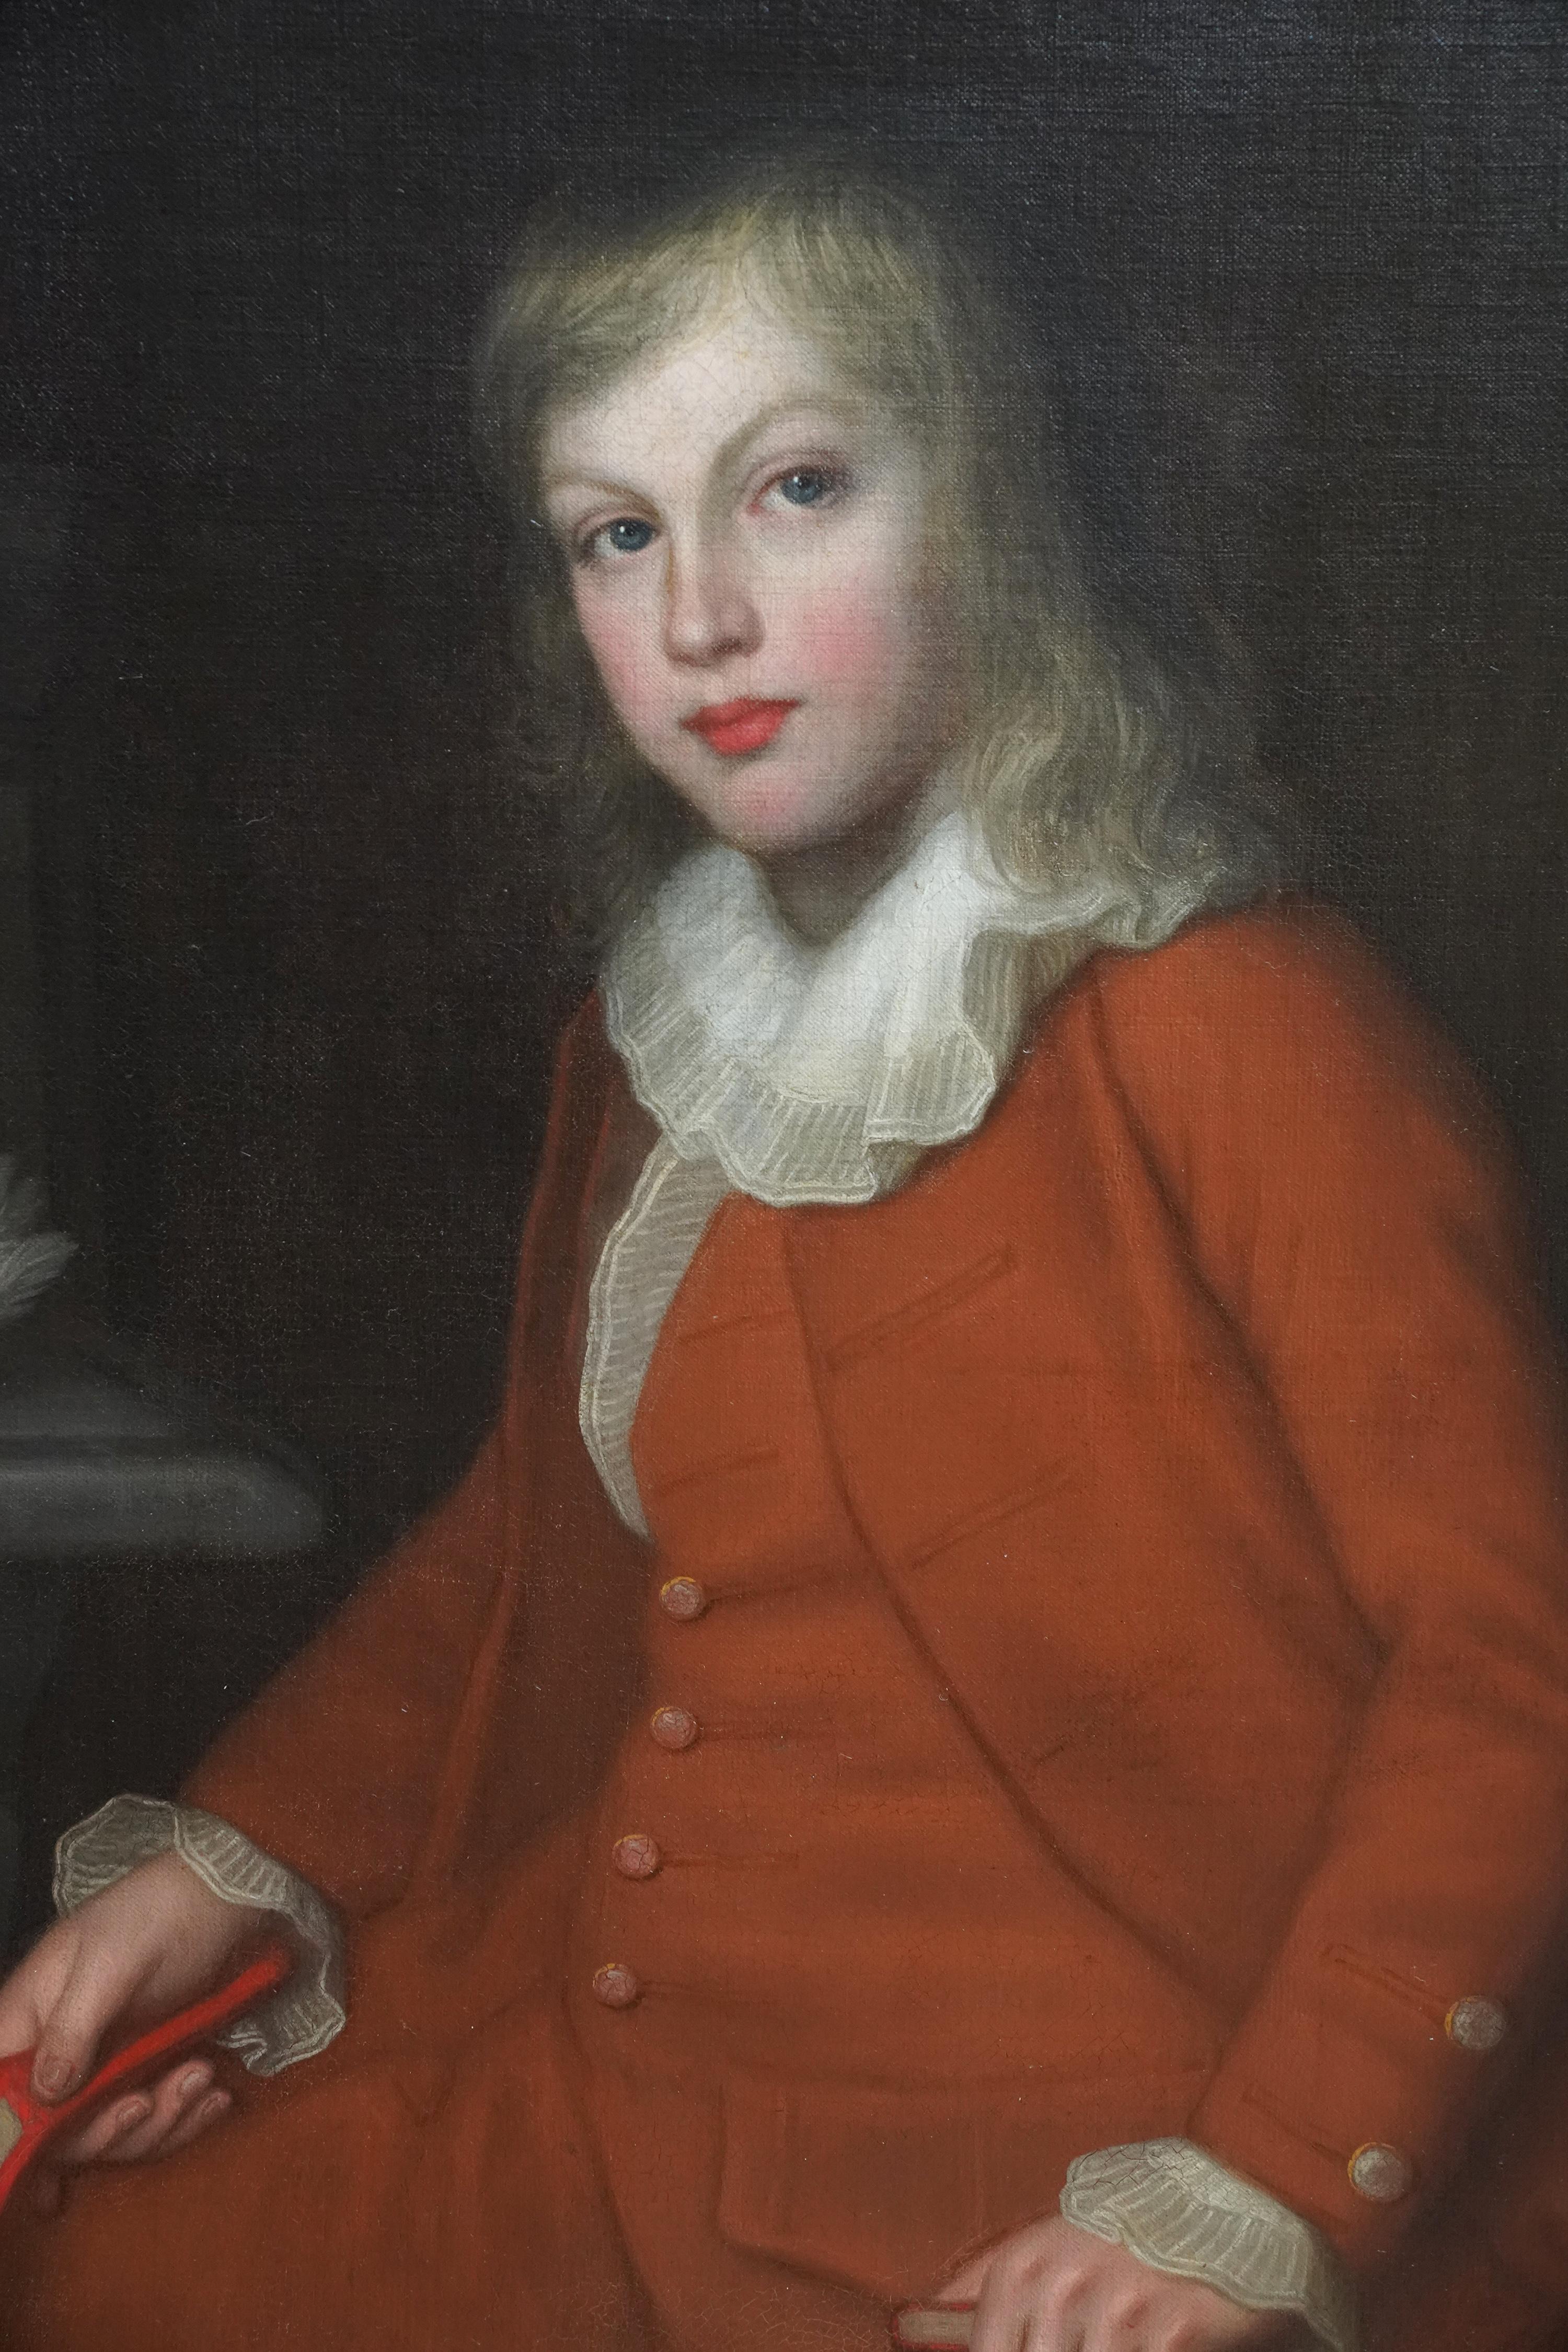 This lovely British 18th century Old Master oil painting is attributed to the manner of Thomas Beach. The sitter is Robert Monypenny (1771-1834) aged seven. He is the youngest son of James Monypenny of Maytham estate and brother to Silvestra. It was